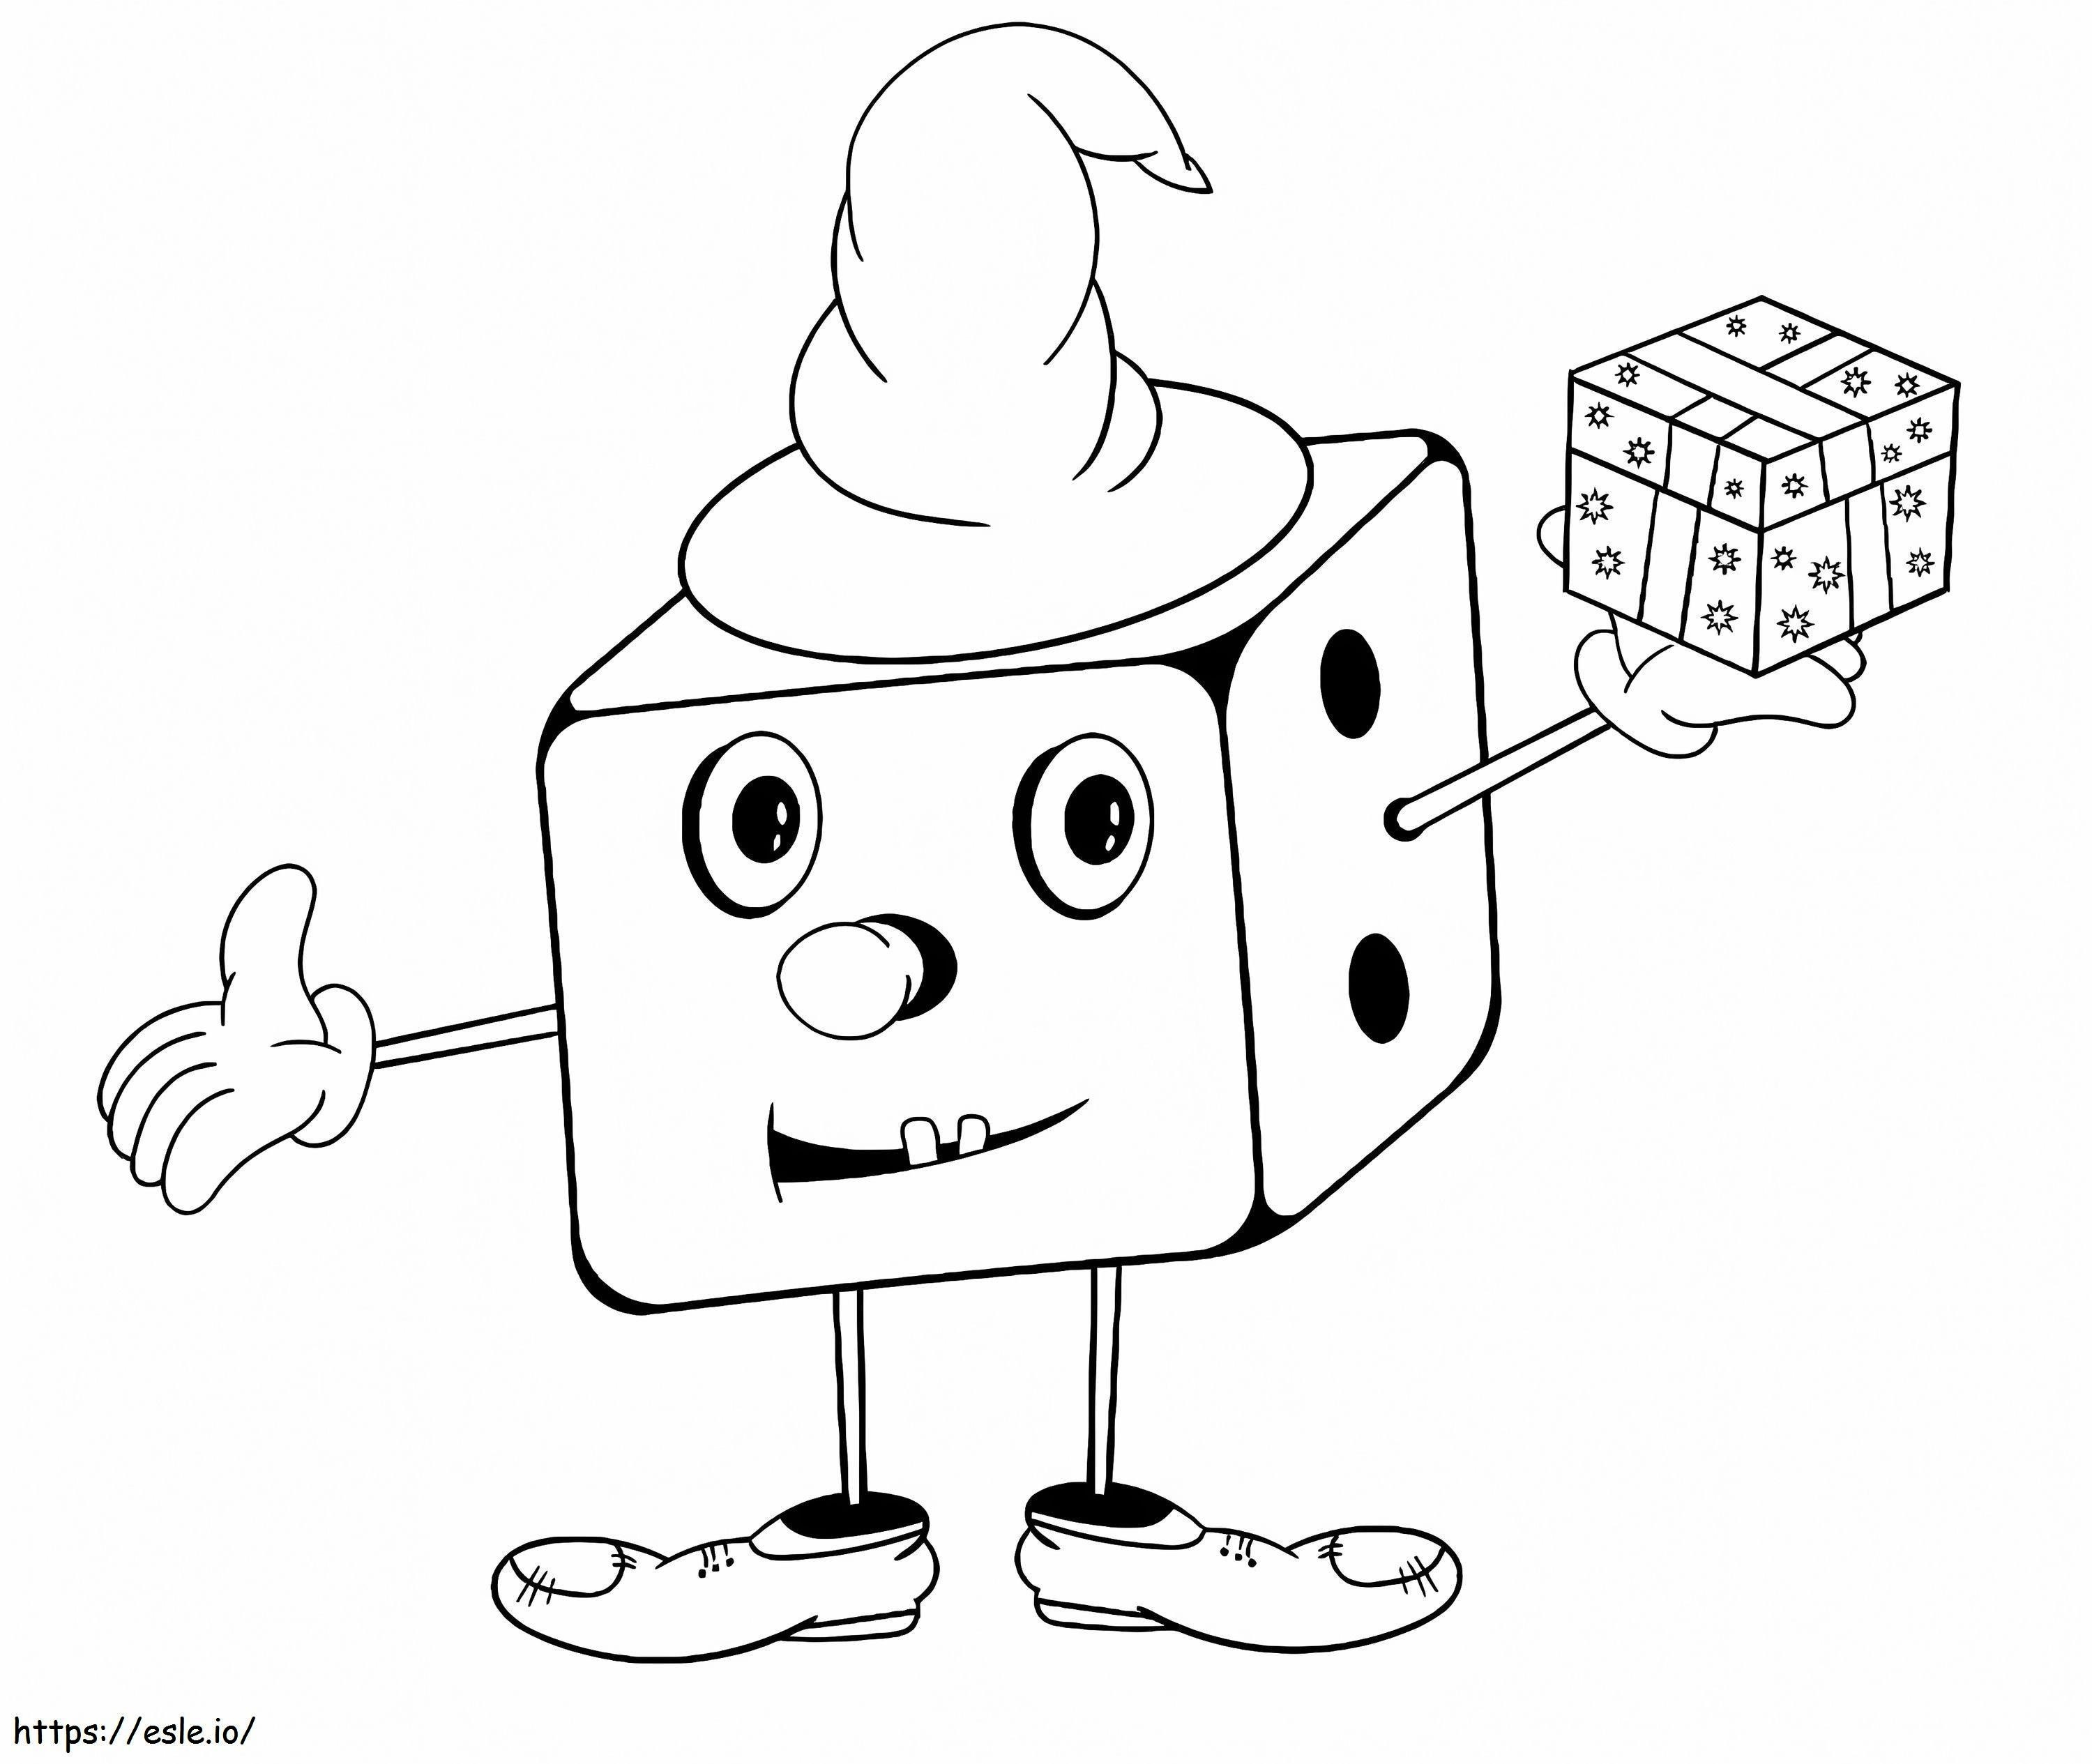 Funny Dice coloring page